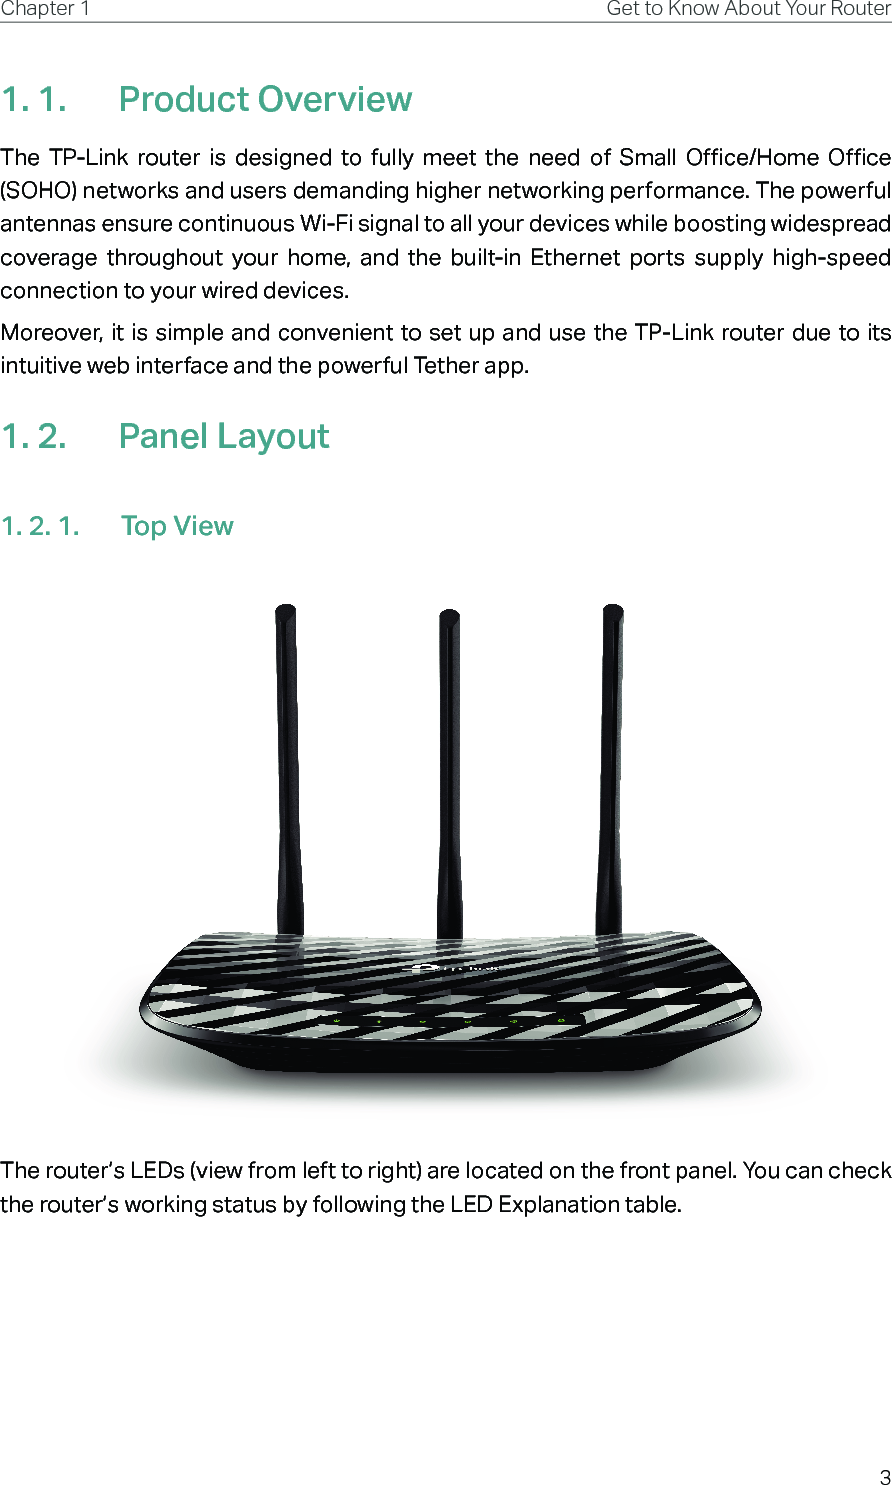 3Chapter 1 Get to Know About Your Router1. 1.  Product OverviewThe TP-Link router is designed to fully meet the need of Small Office/Home Office (SOHO) networks and users demanding higher networking performance. The powerful antennas ensure continuous Wi-Fi signal to all your devices while boosting widespread coverage throughout your home, and the built-in Ethernet ports supply high-speed connection to your wired devices.Moreover, it is simple and convenient to set up and use the TP-Link router due to its intuitive web interface and the powerful Tether app.1. 2.  Panel Layout1. 2. 1.  Top ViewThe router’s LEDs (view from left to right) are located on the front panel. You can check the router’s working status by following the LED Explanation table.